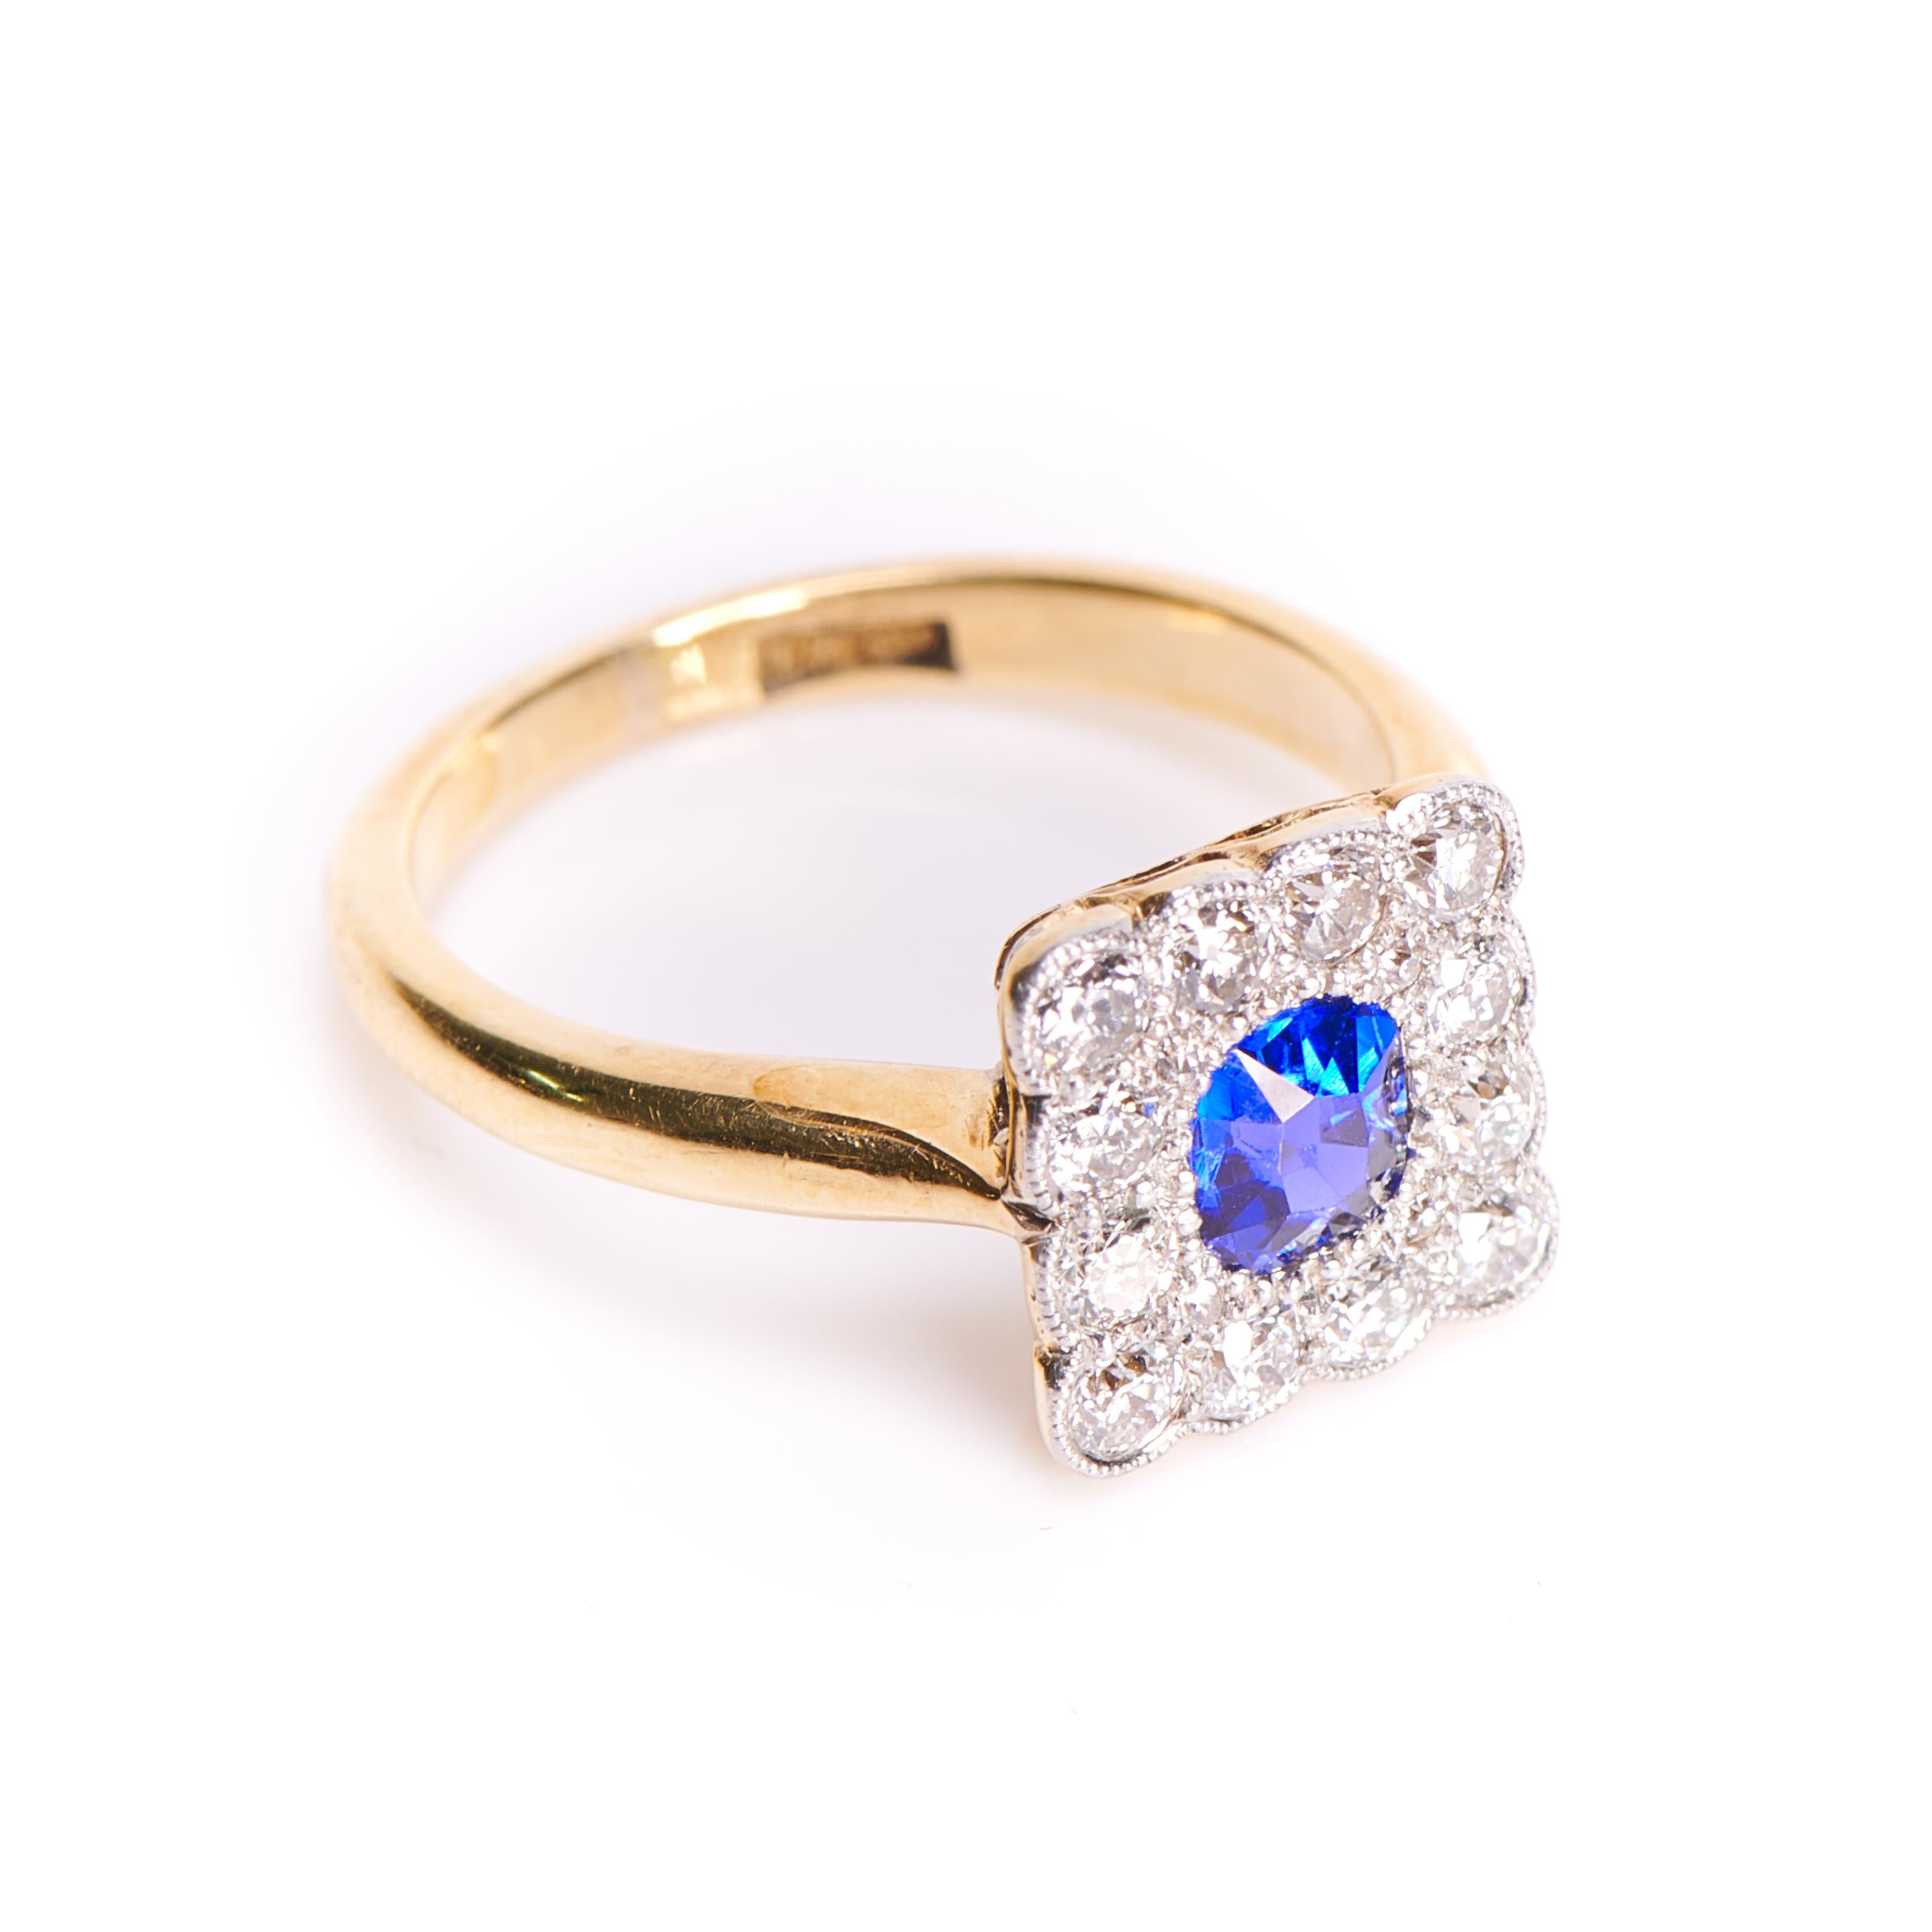 The square setting of this ring is set with old European-cut diamonds surrounding a beautifully proportioned cushion-shaped sapphire in a cornflower blue hue. The borders are dotted using the 'millegrain' technique, which jewellers developed at the